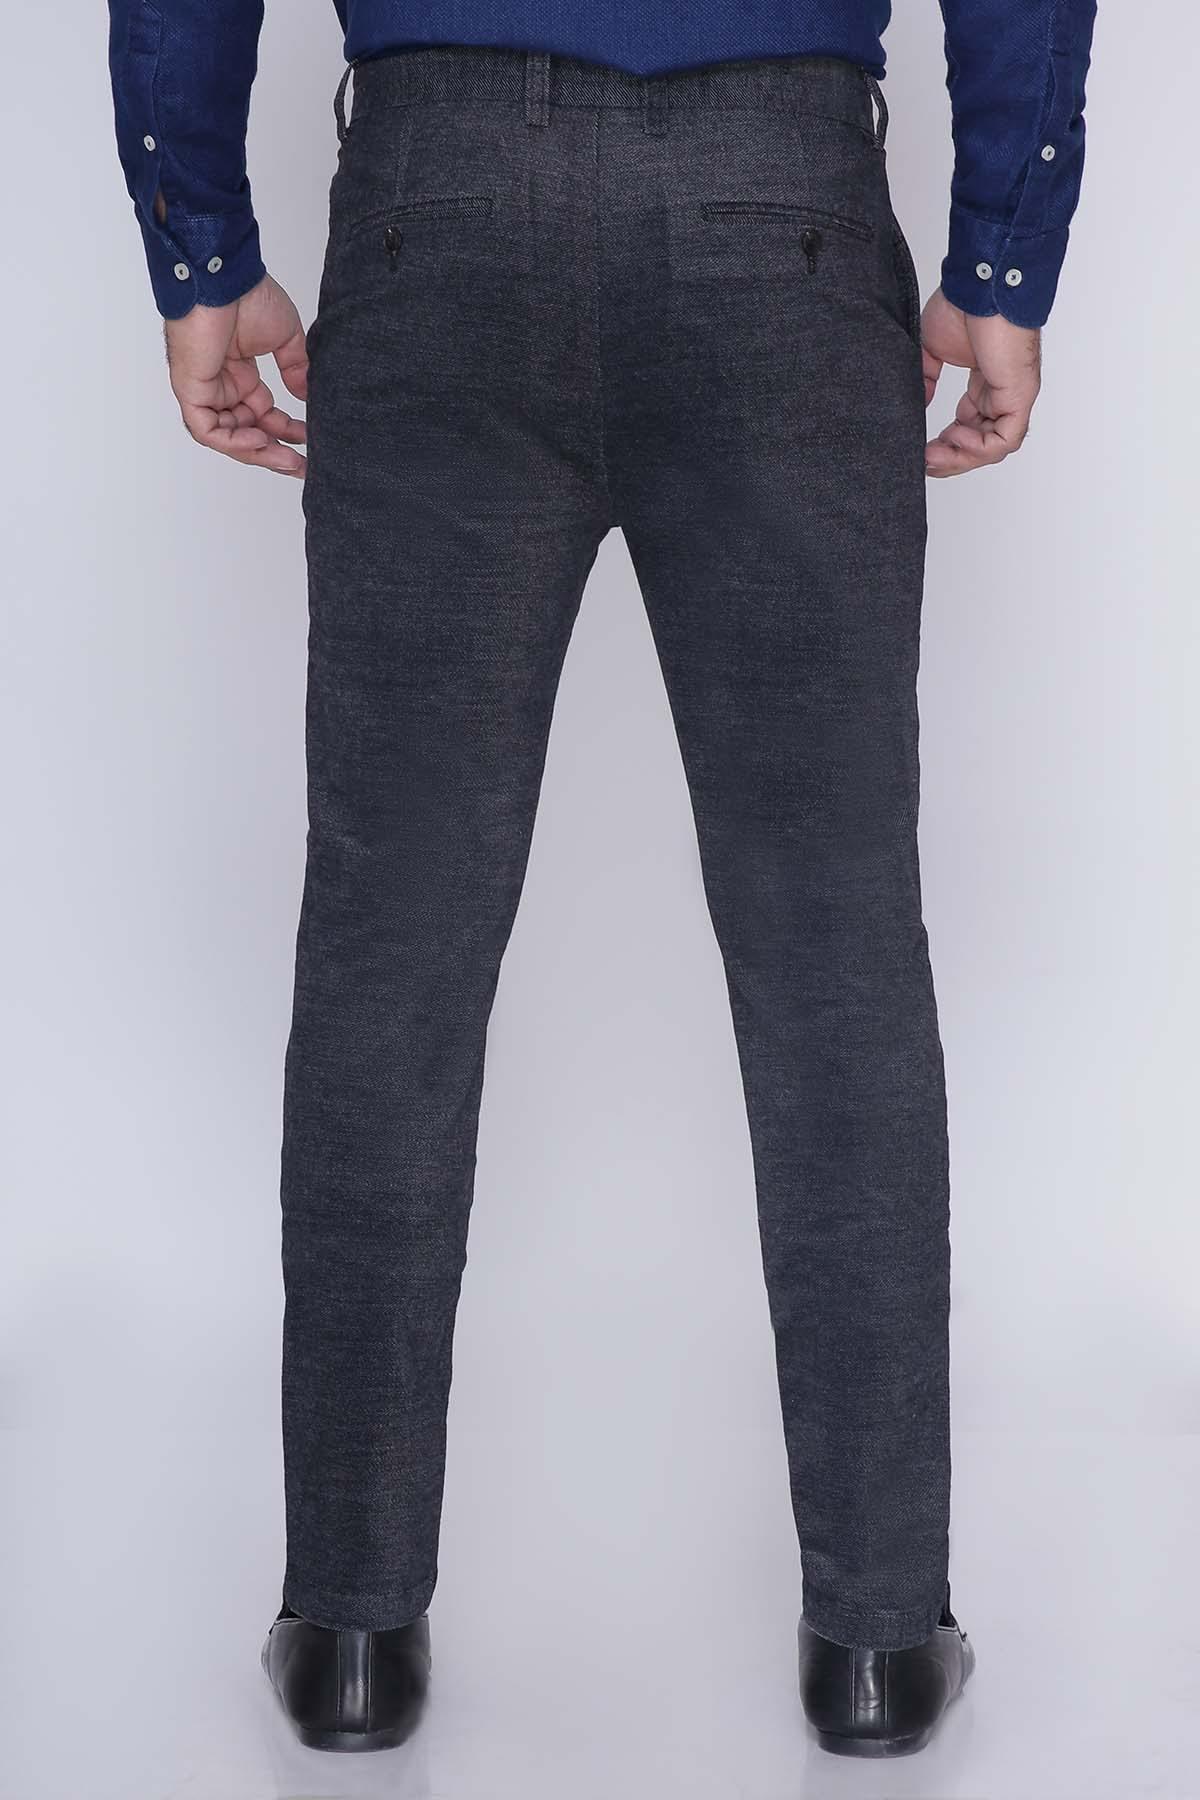 C PANT CROSS POCKET SMART FIT CHARCOAL at Charcoal Clothing